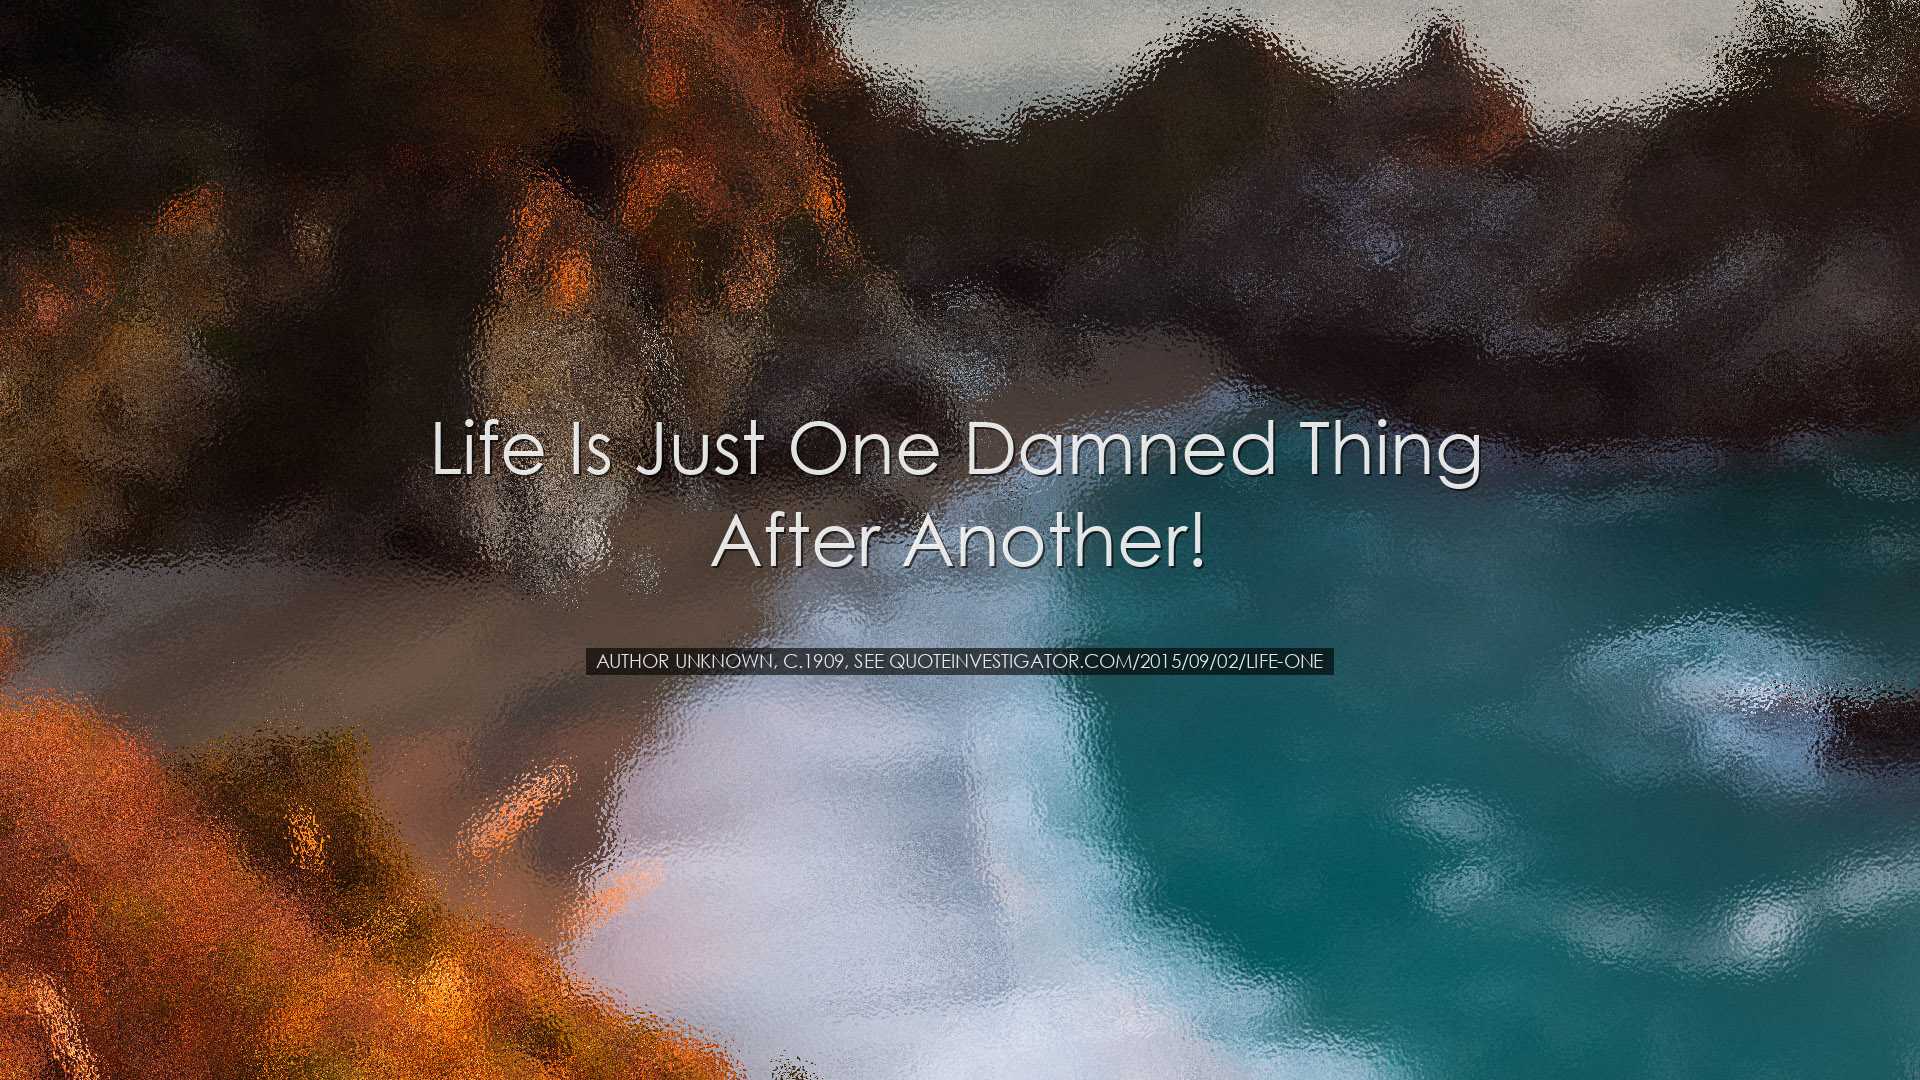 Life is just one damned thing after another! - Author unknown, c.1